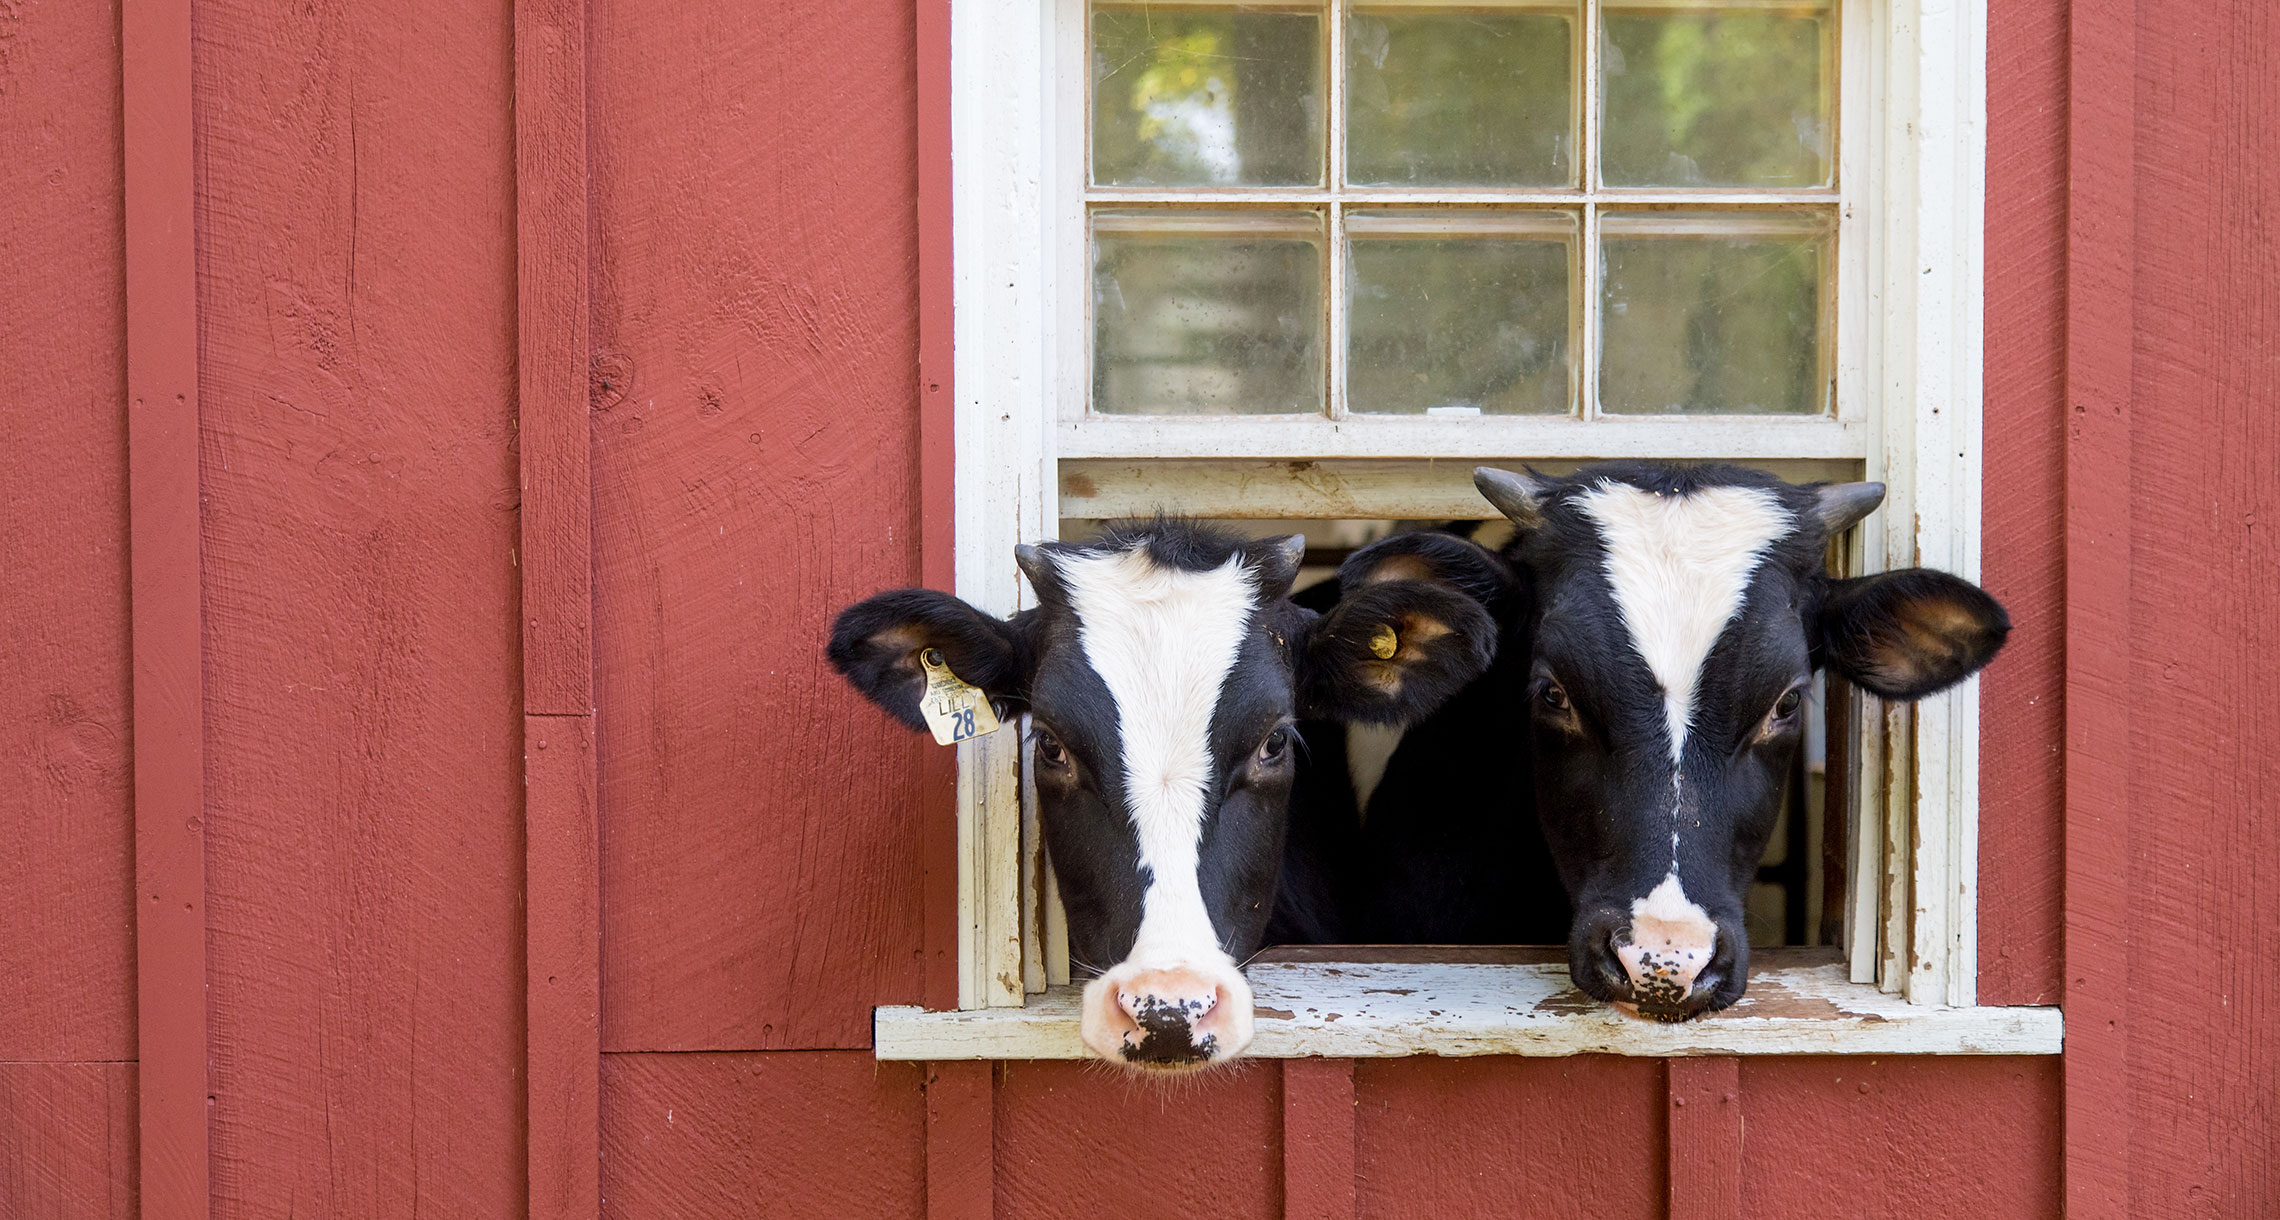 Cows looking out window